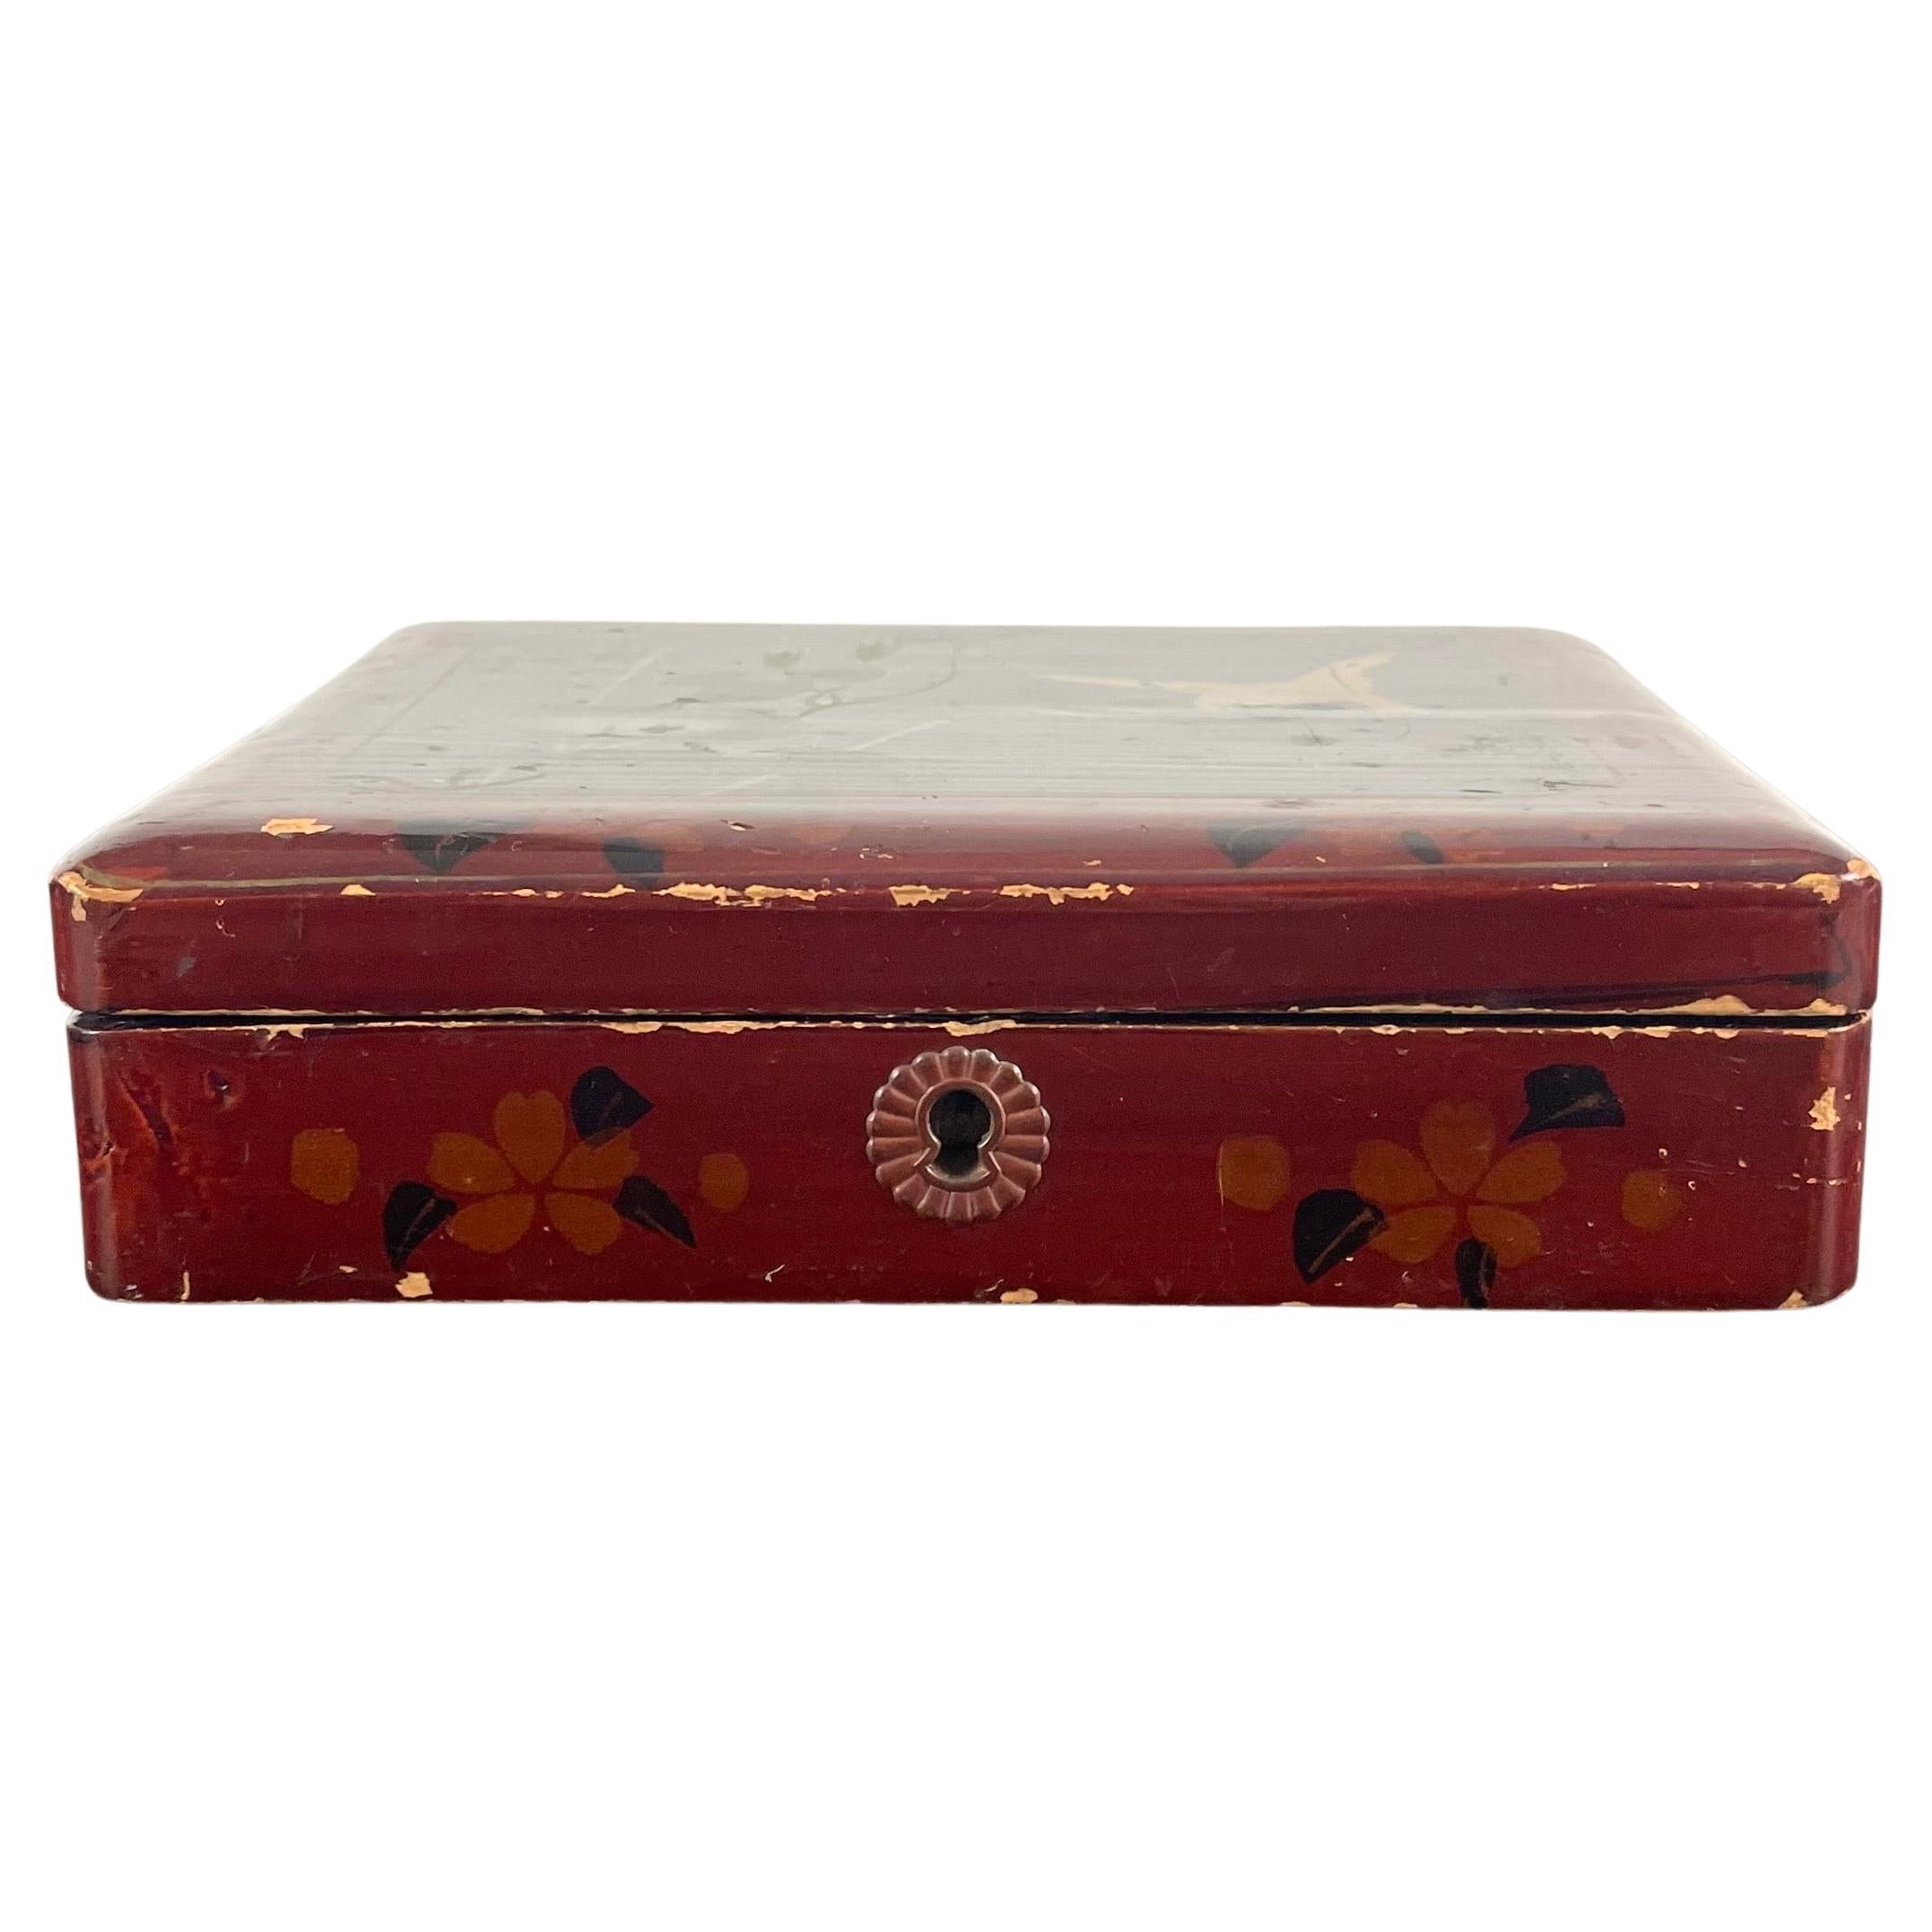 What is a lacquerware box?